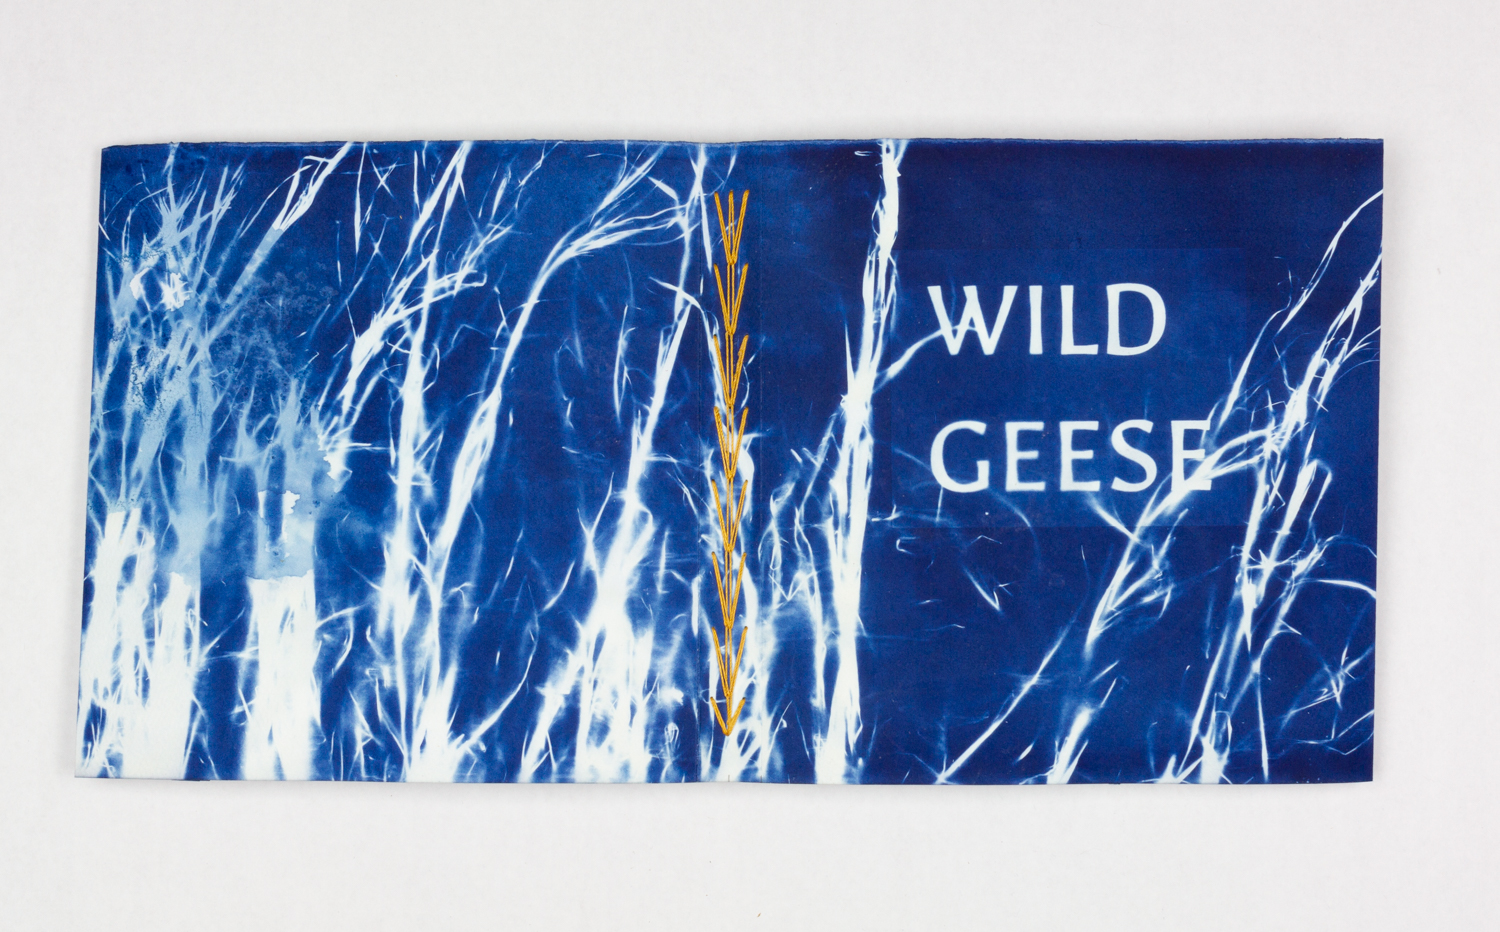 Printing images and text with cyanotype - The Printing Museum